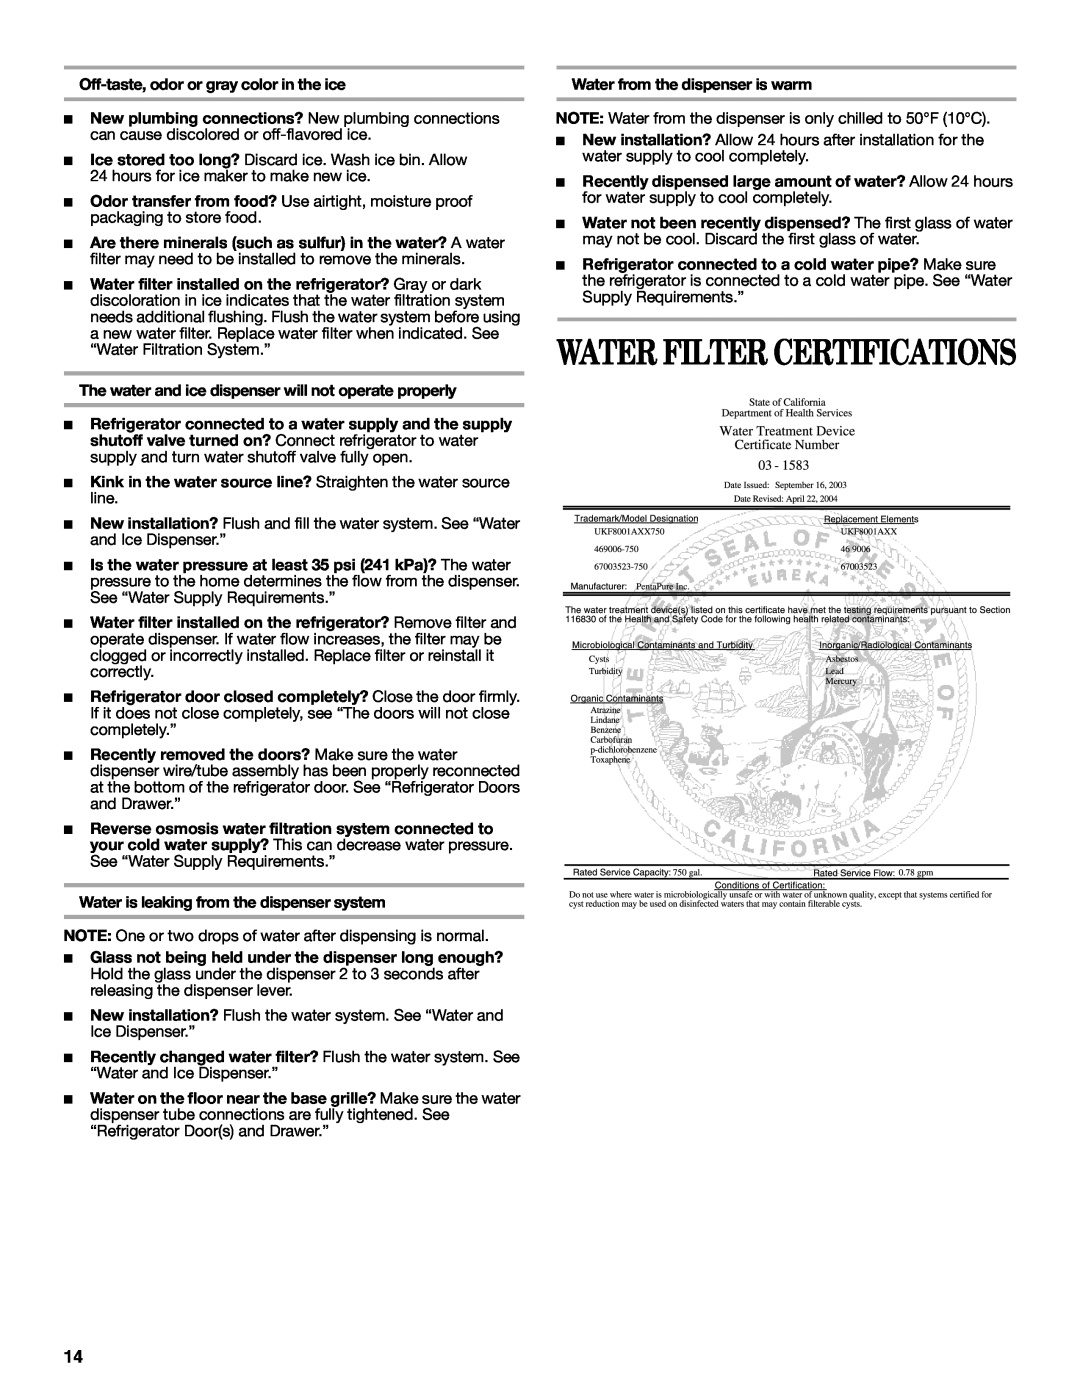 Whirlpool W10215185A installation instructions Water Filter Certifications, Off-taste, odor or gray color in the ice 